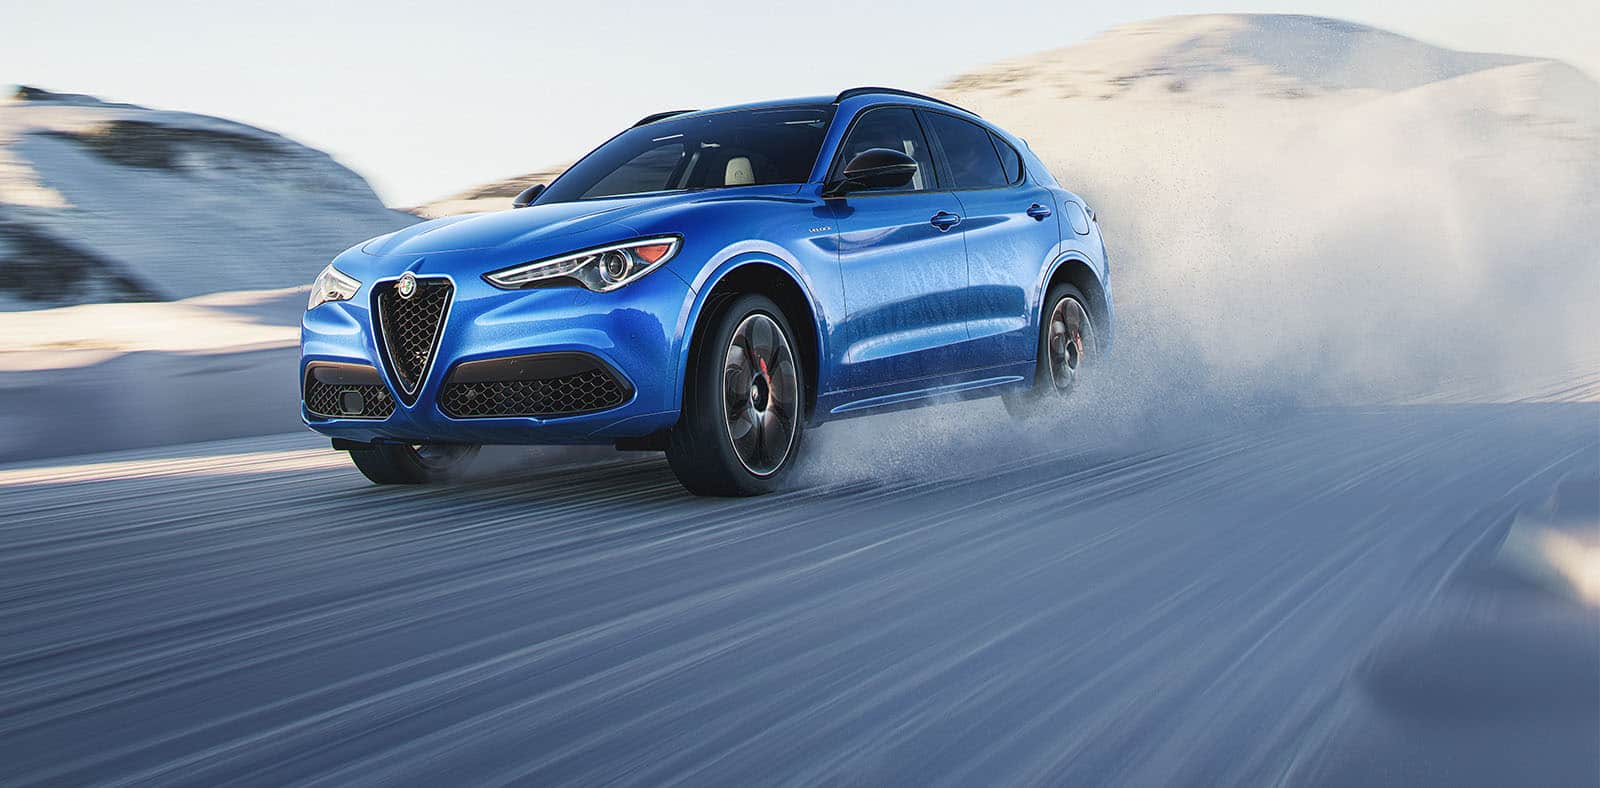 A blue 2023 Alfa Romeo Stelvio Veloce being driven on a snow-covered surface with the background blurred to indicate the speed of the vehicle.